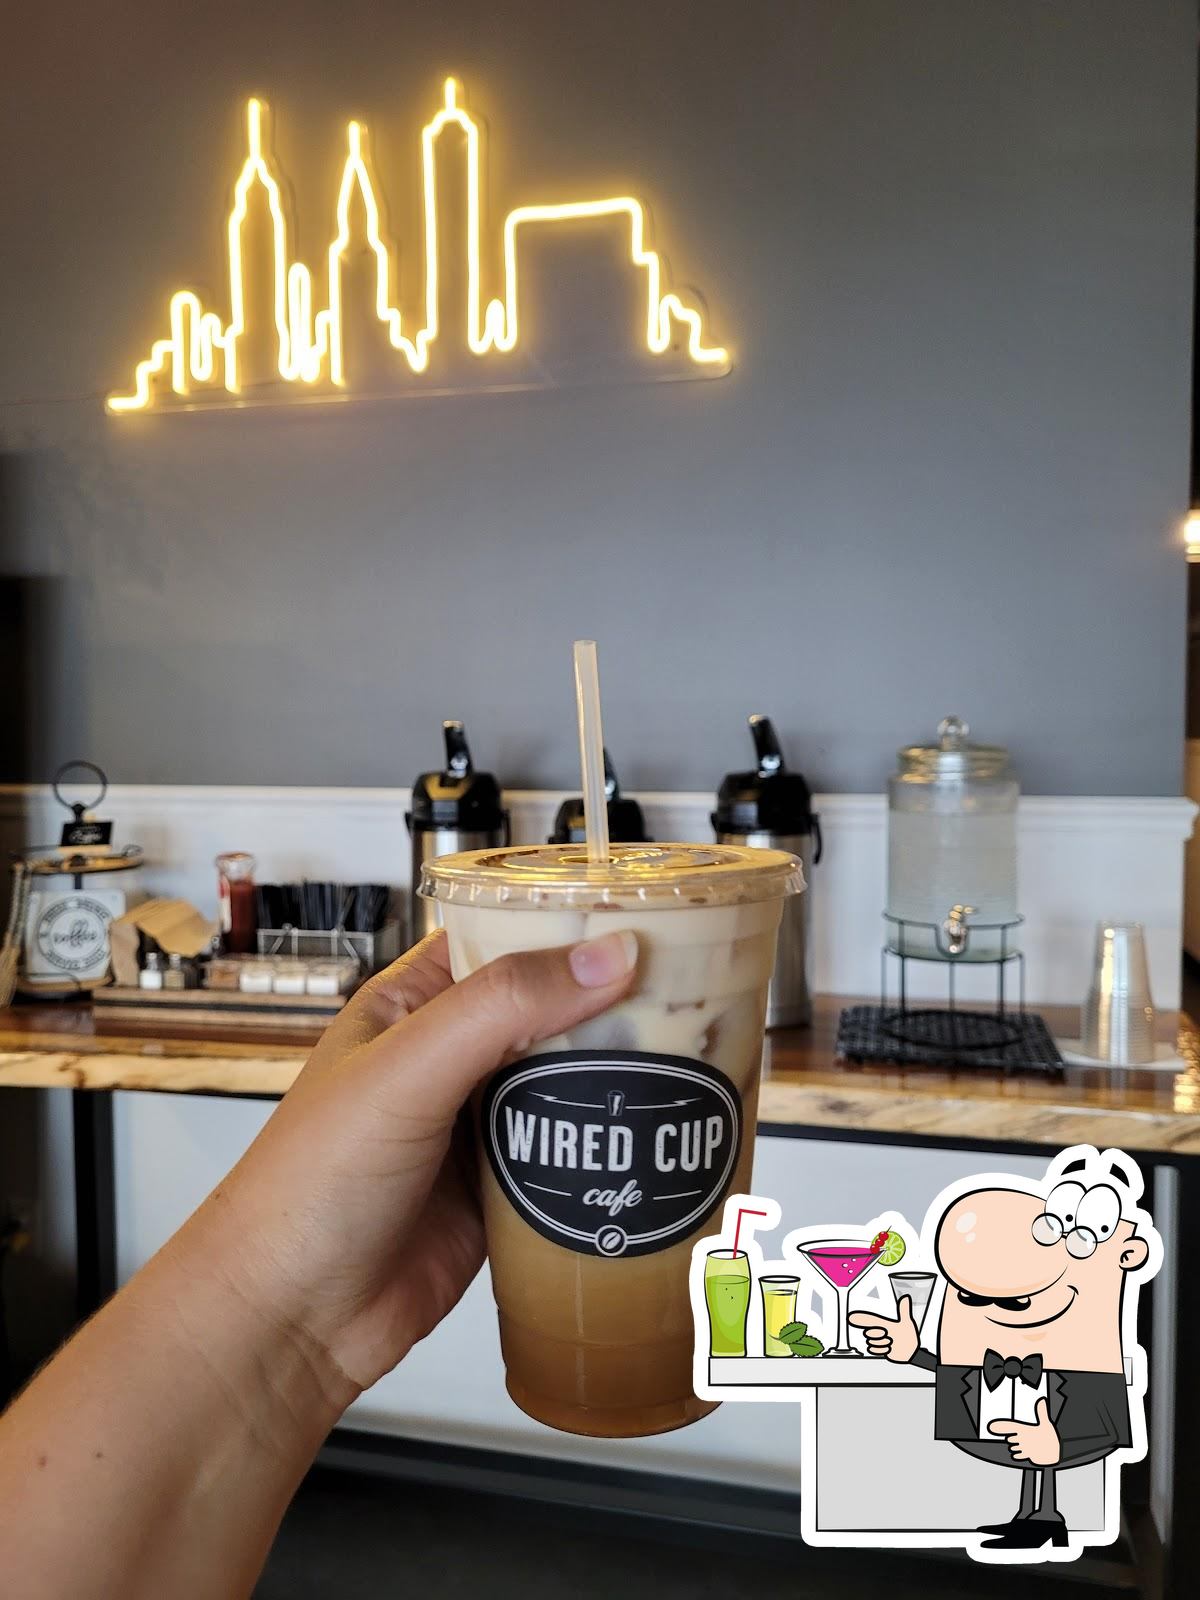 $10 For $20 Worth Of Cafe Dining at Wired Cup Cafe - Ephrata, PA